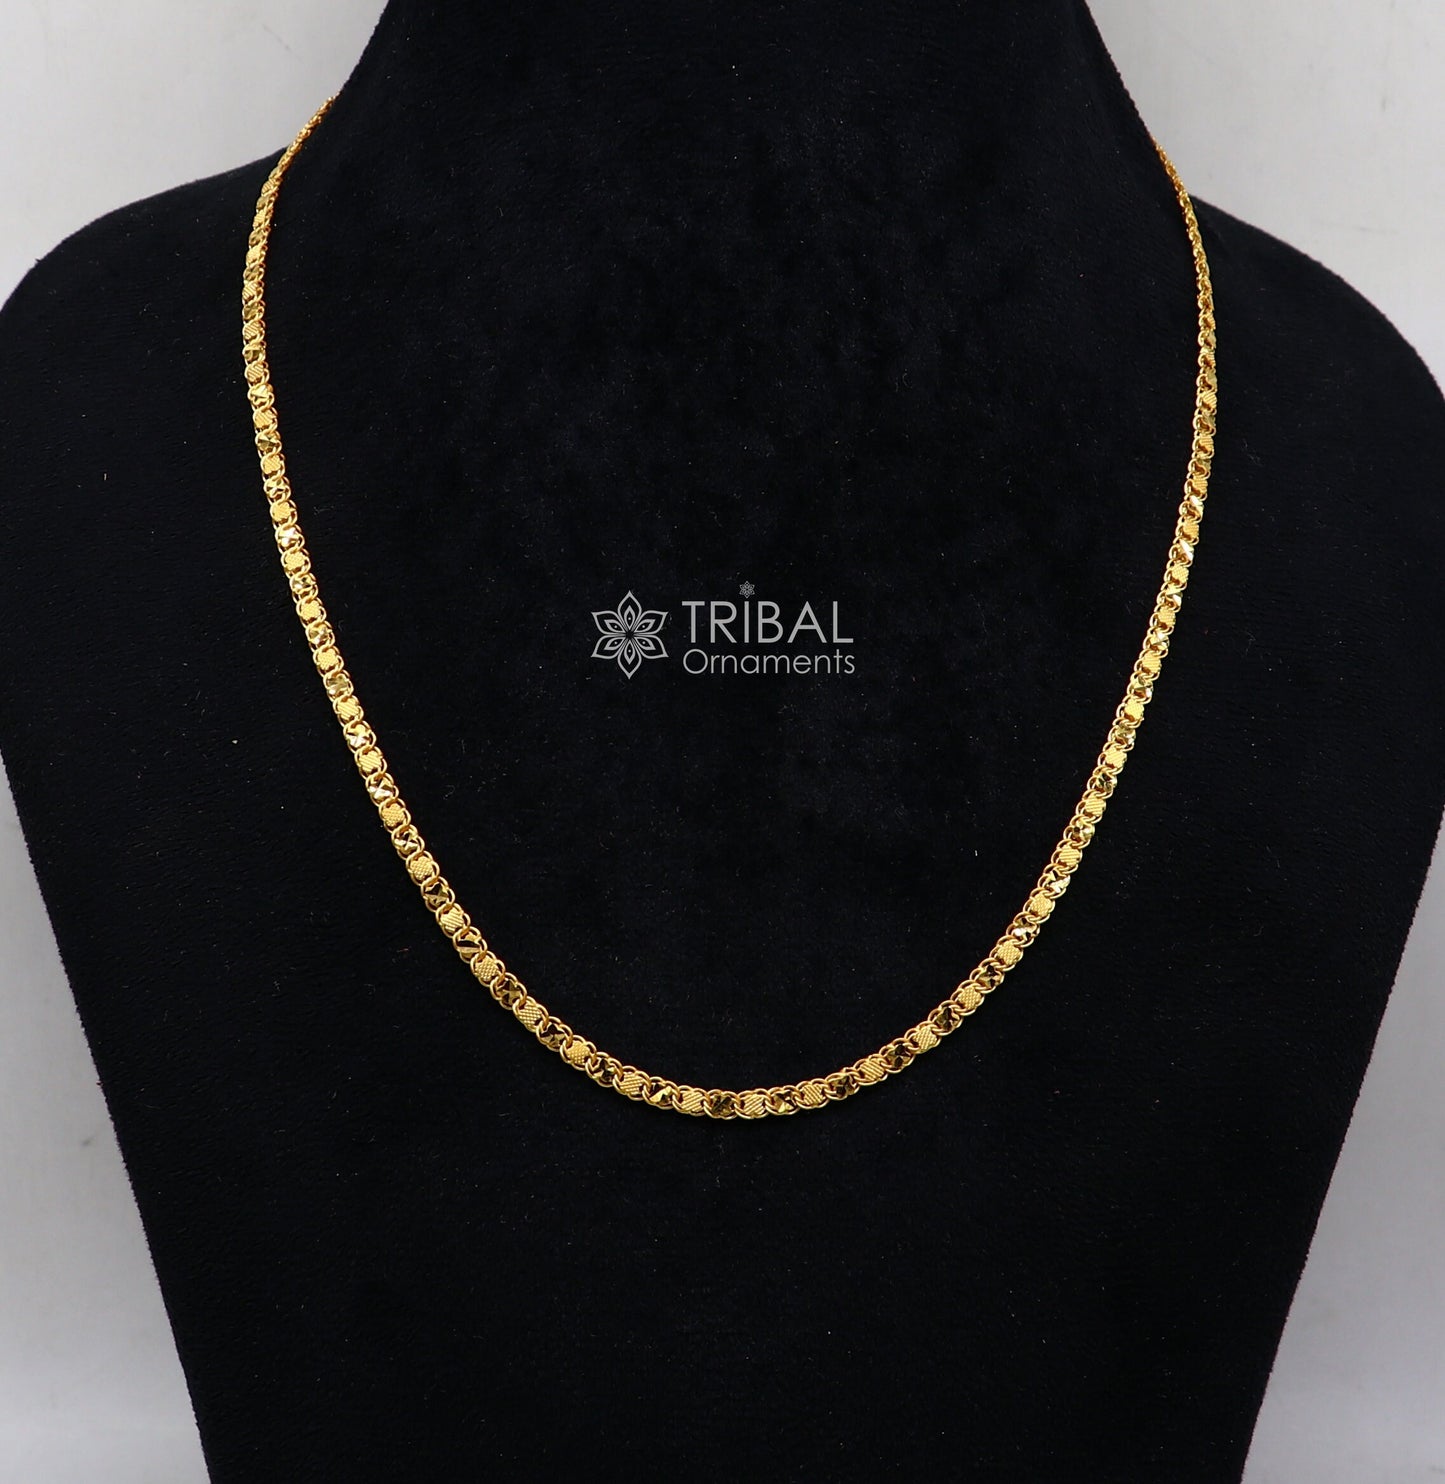 3mm solid 22kt yellow gold royal handmade chain fabulous design delicate unisex gifting chain necklace best trendy design jewelry gch575 - TRIBAL ORNAMENTS